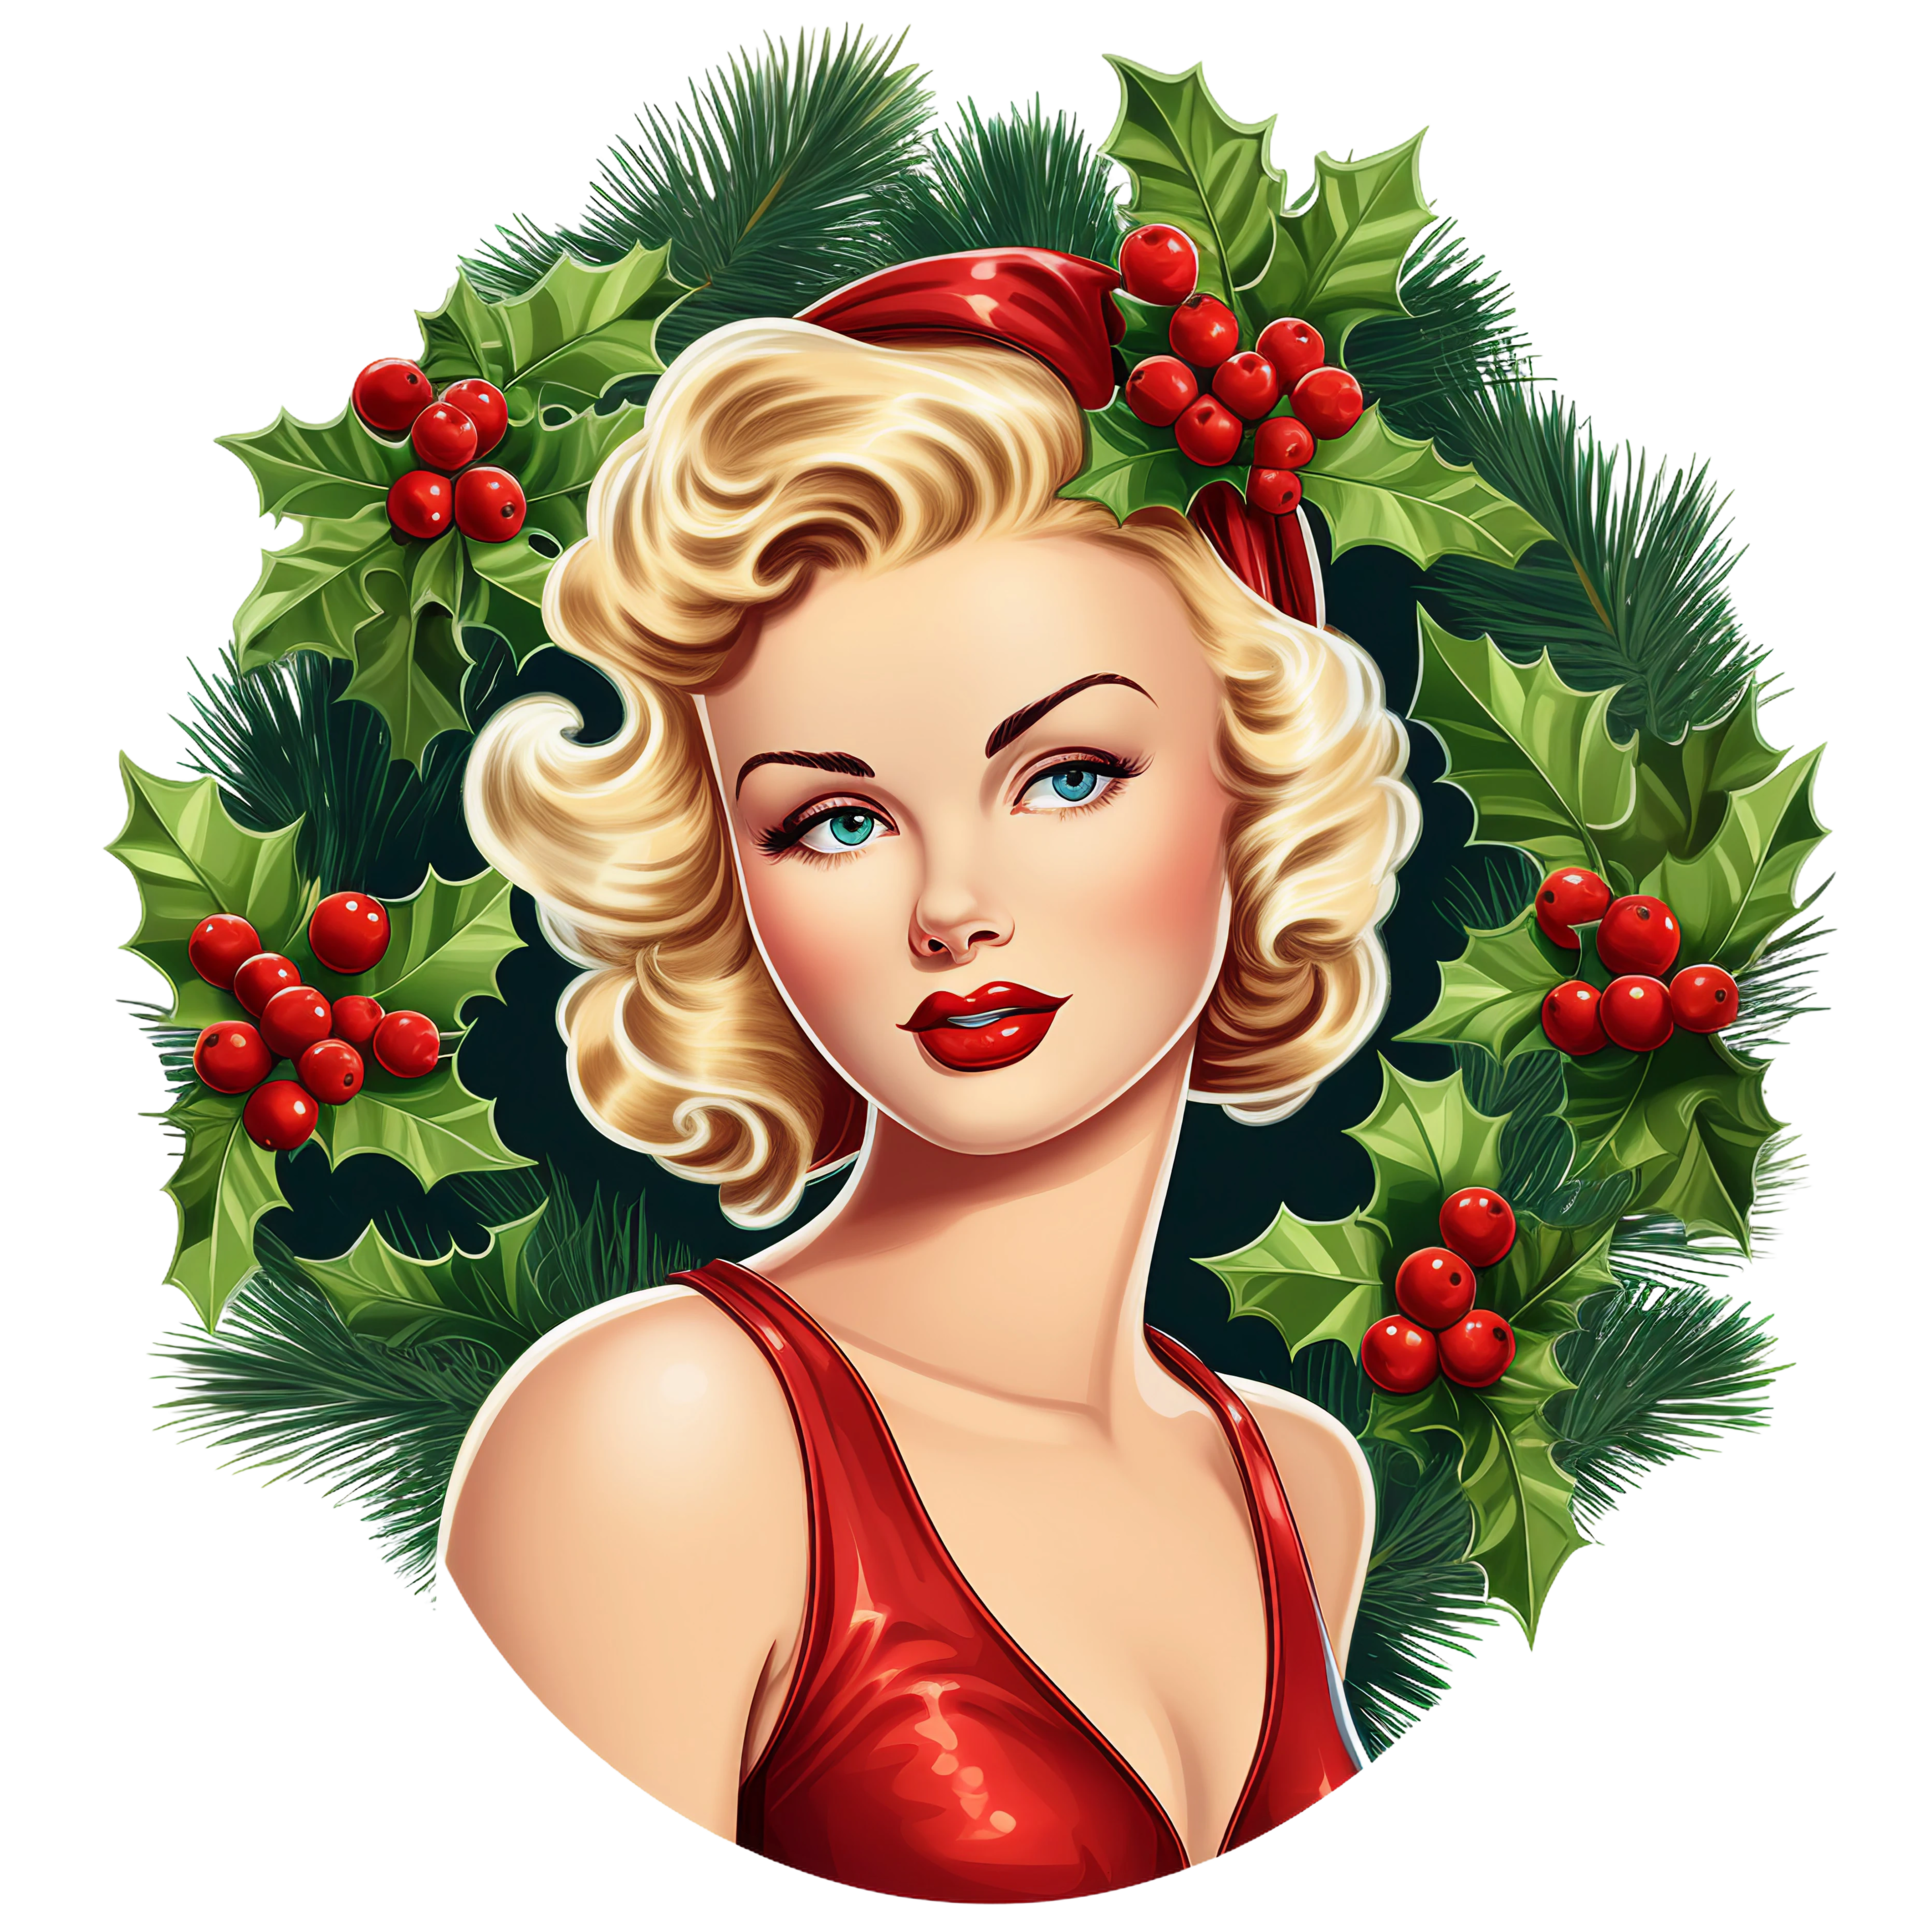 dennis lunder share vintage christmas pin up girl images photos